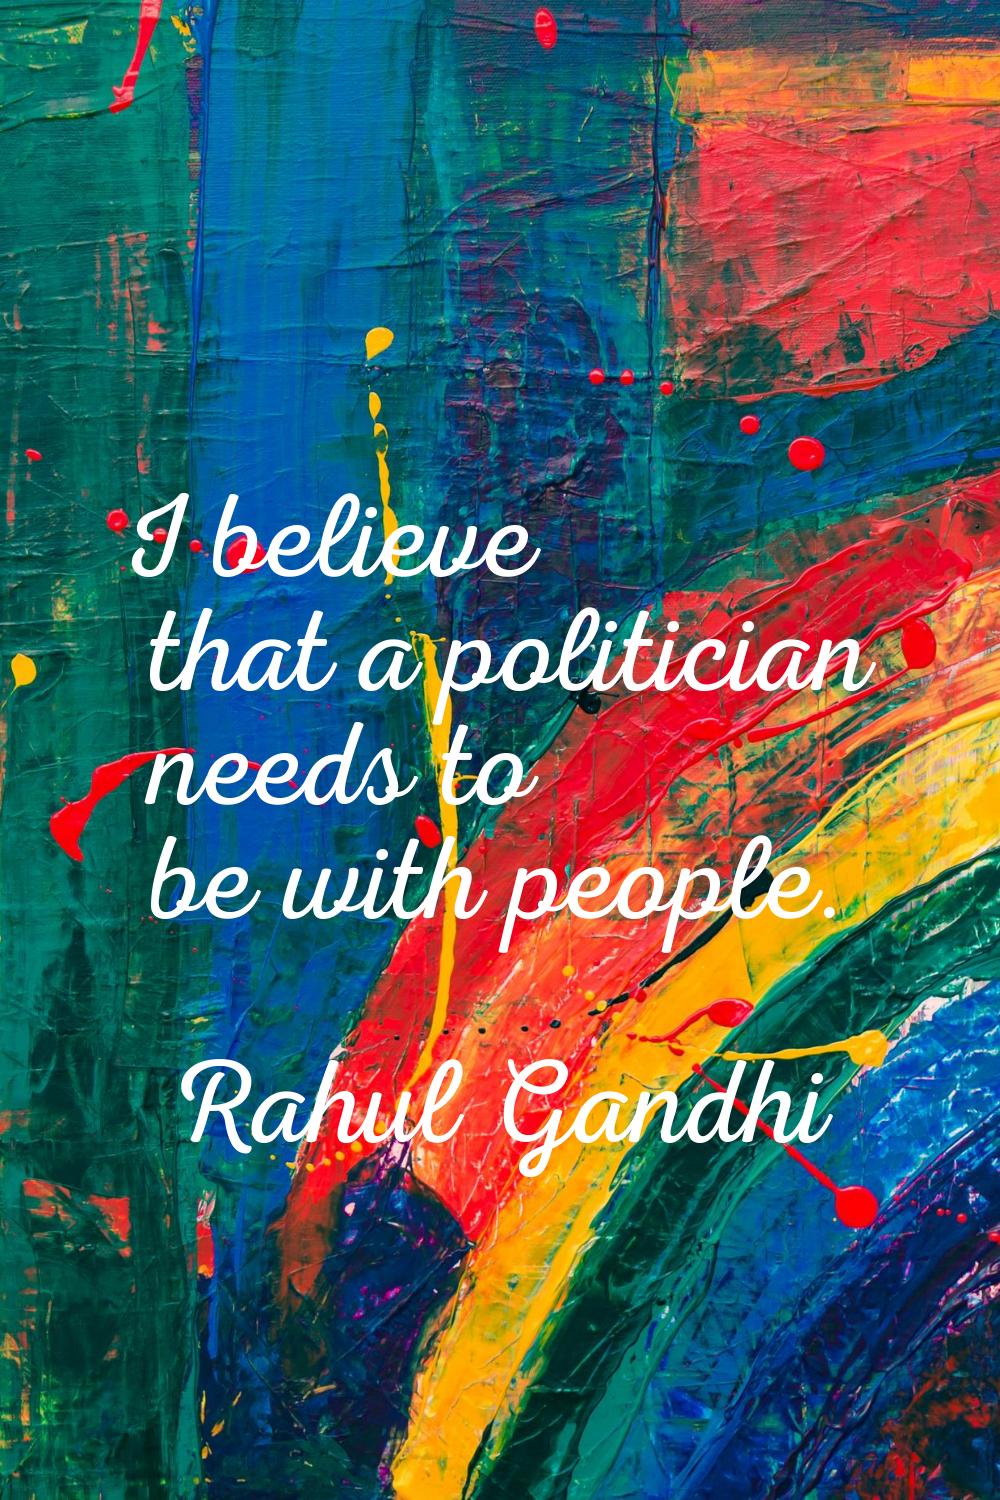 I believe that a politician needs to be with people.